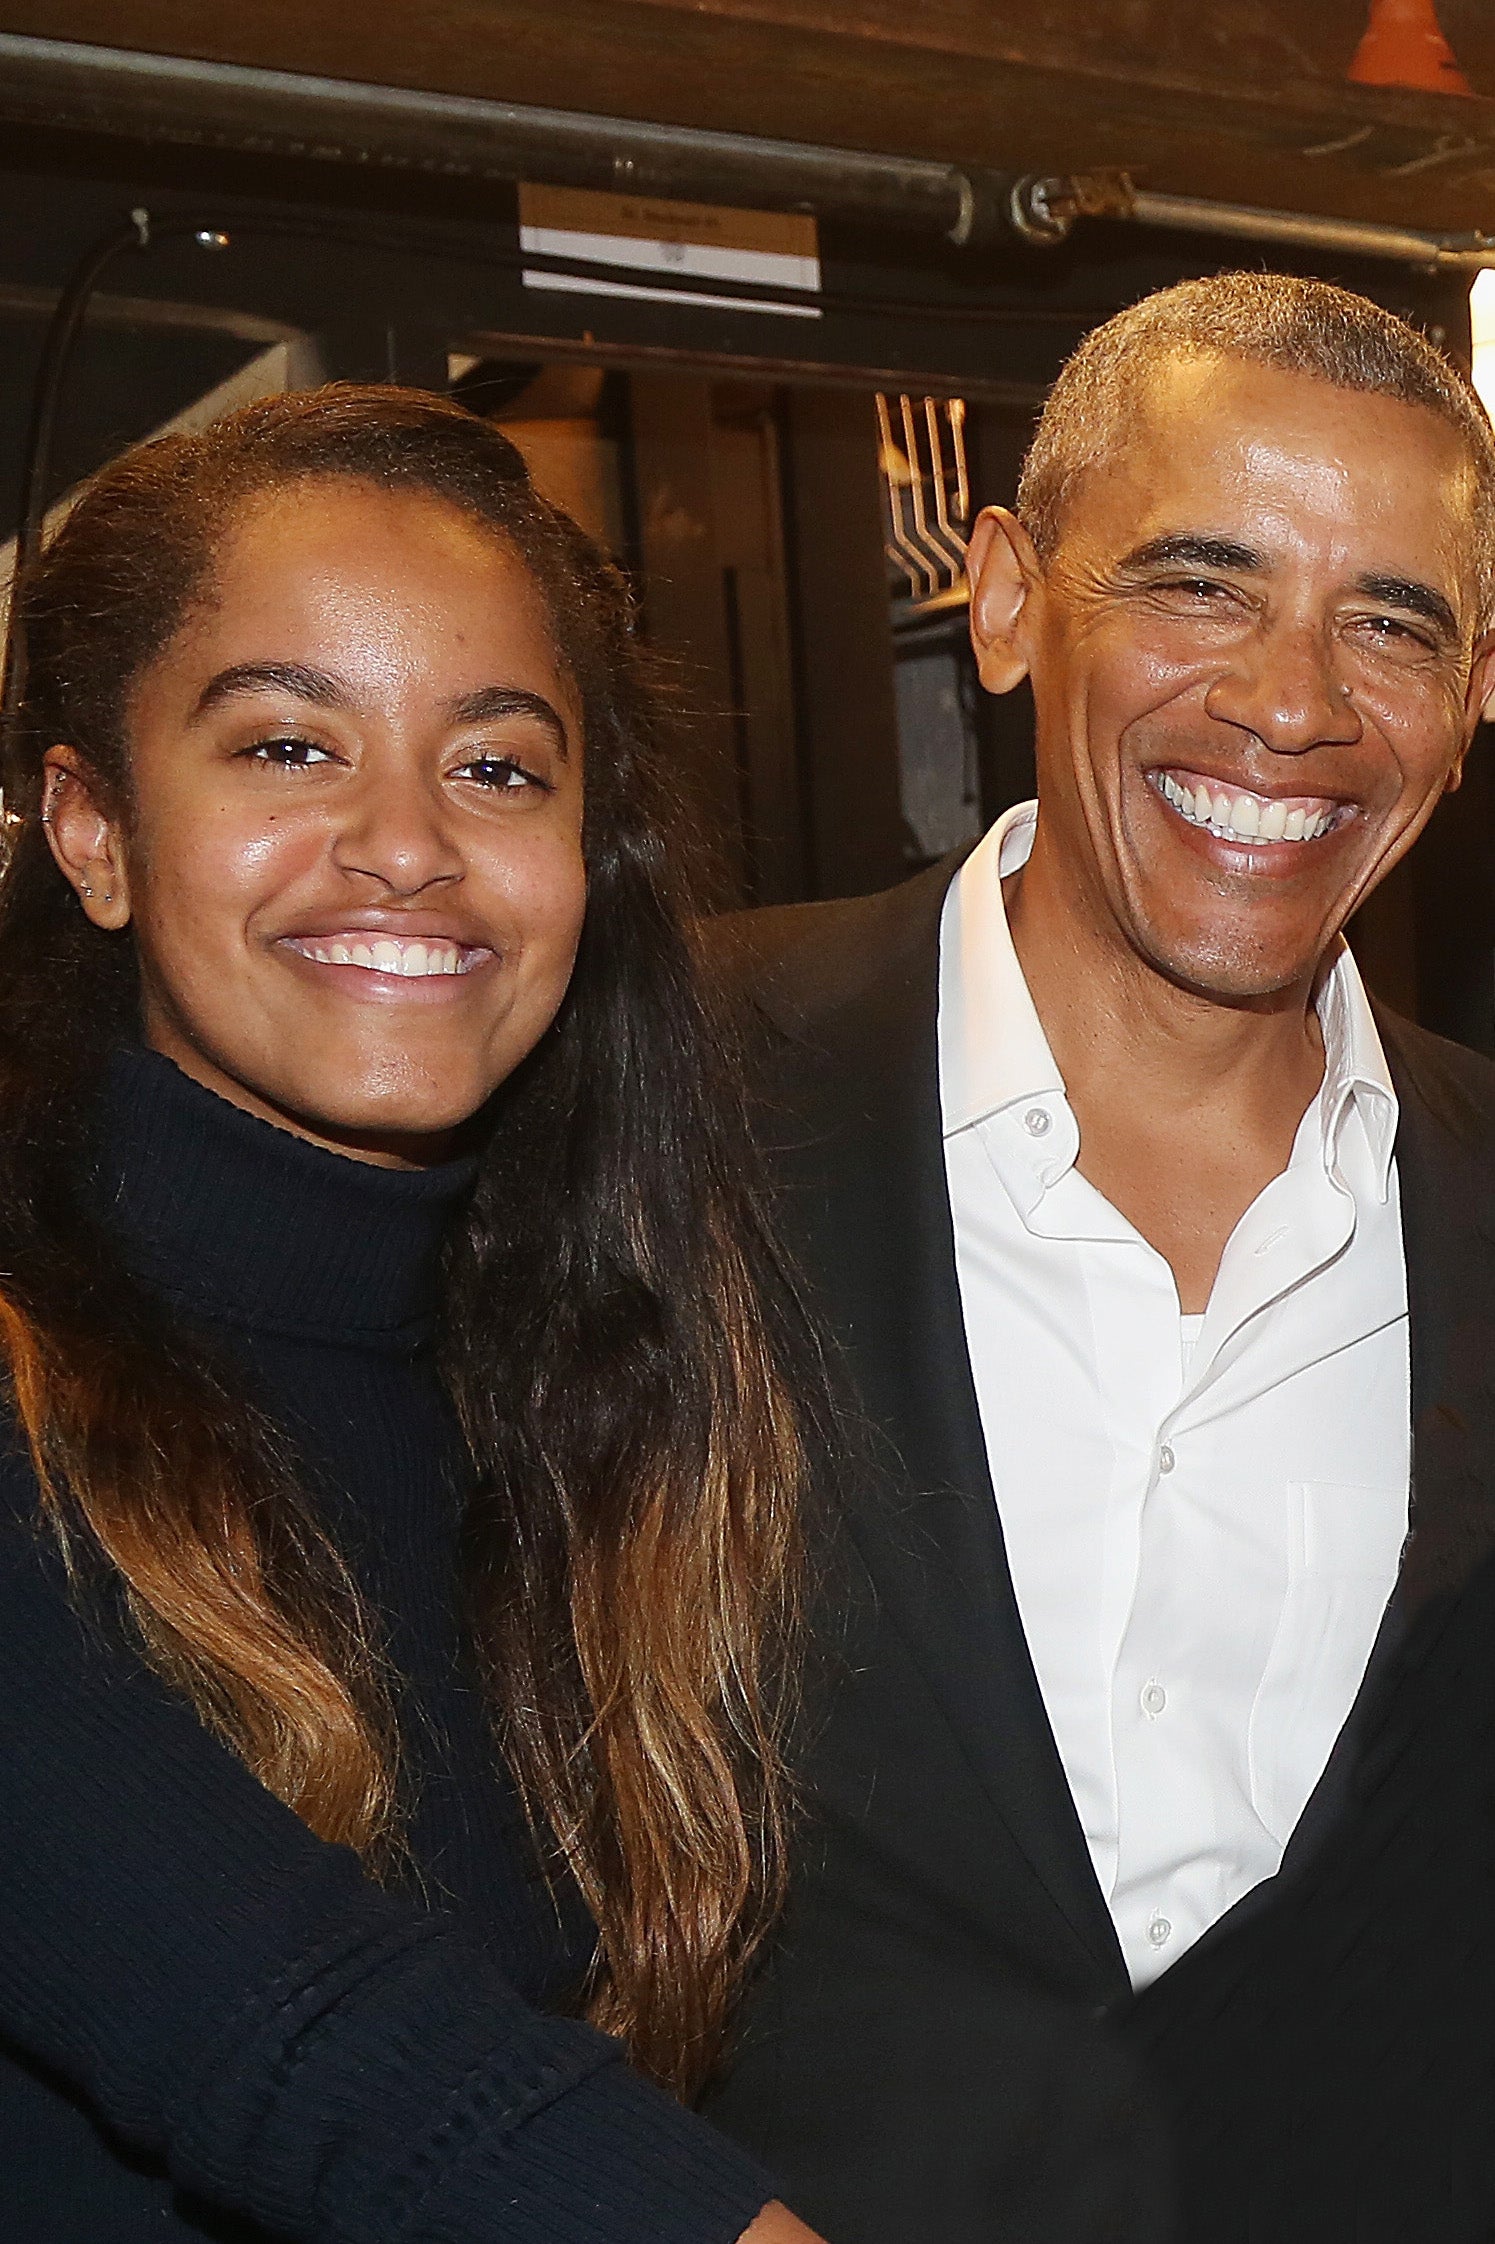 President Obama Reveals He Cried When Dropping Off Daughter Malia At College: 'It Was Like Open-Heart Surgery'